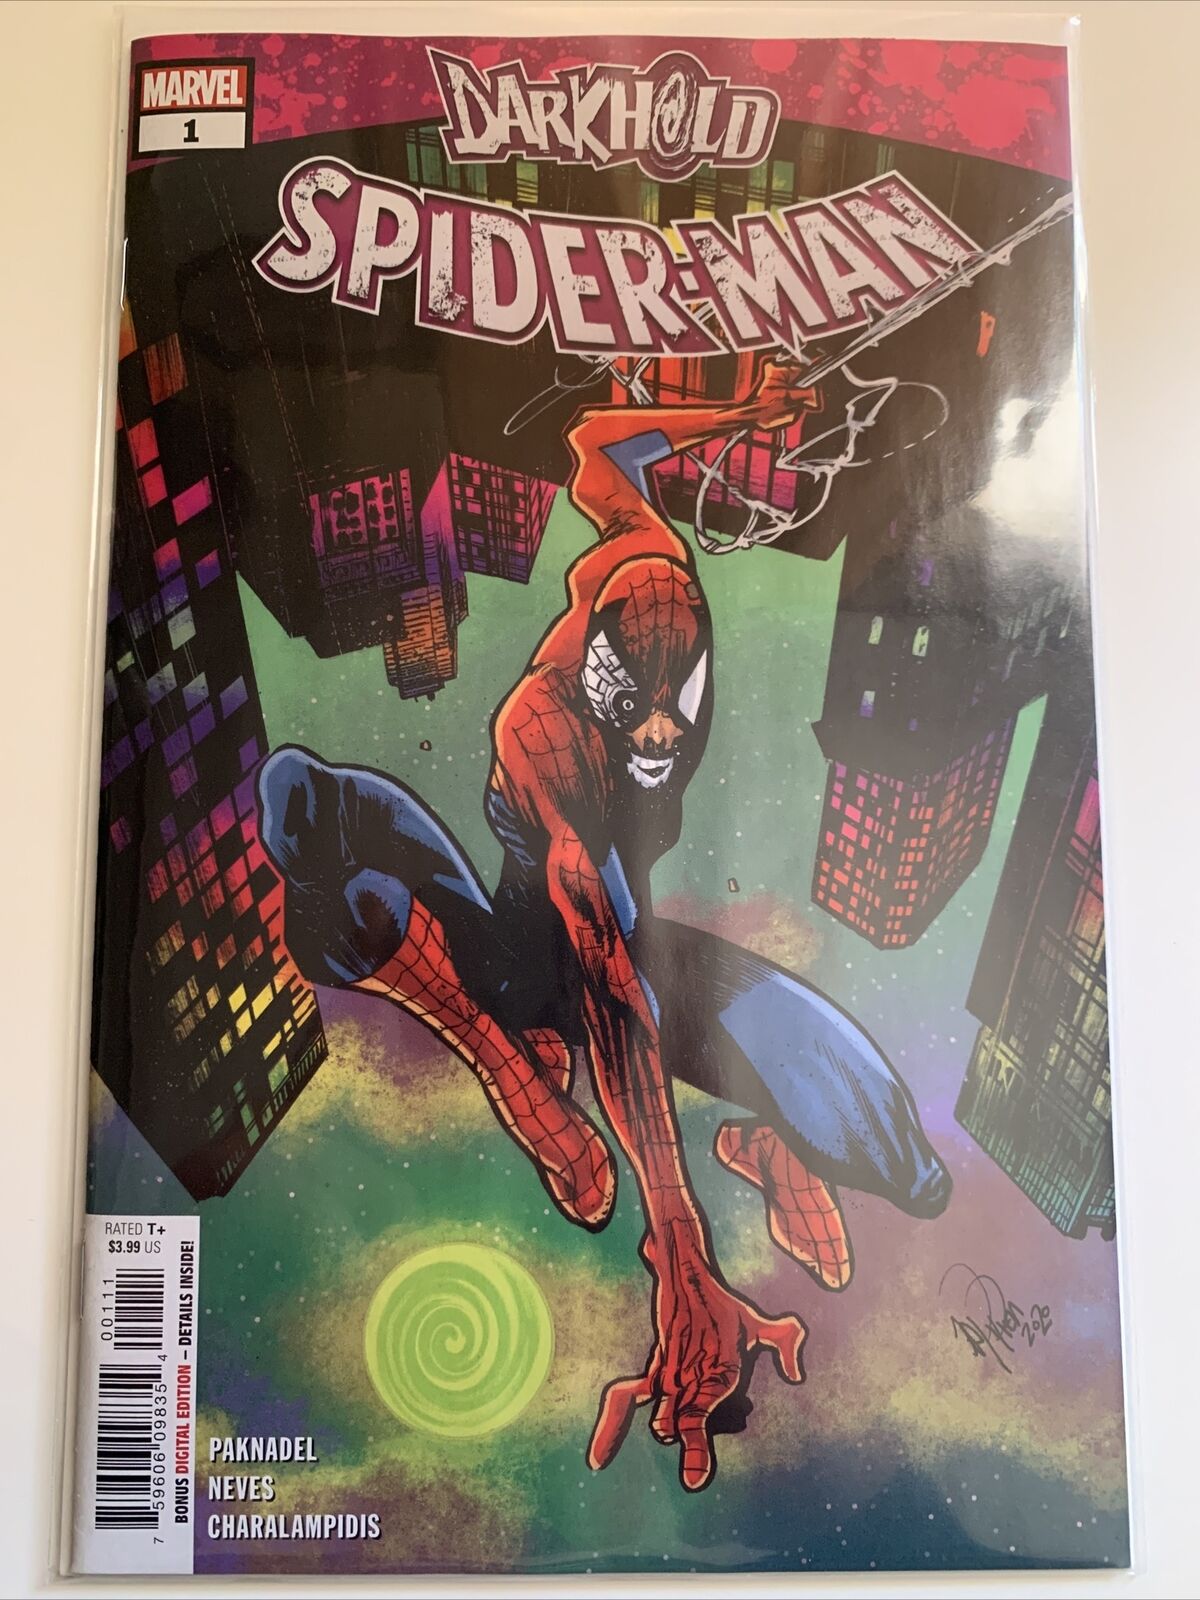 Darkhold, The: Spider-Man #1 ; Marvel | we combine shipping